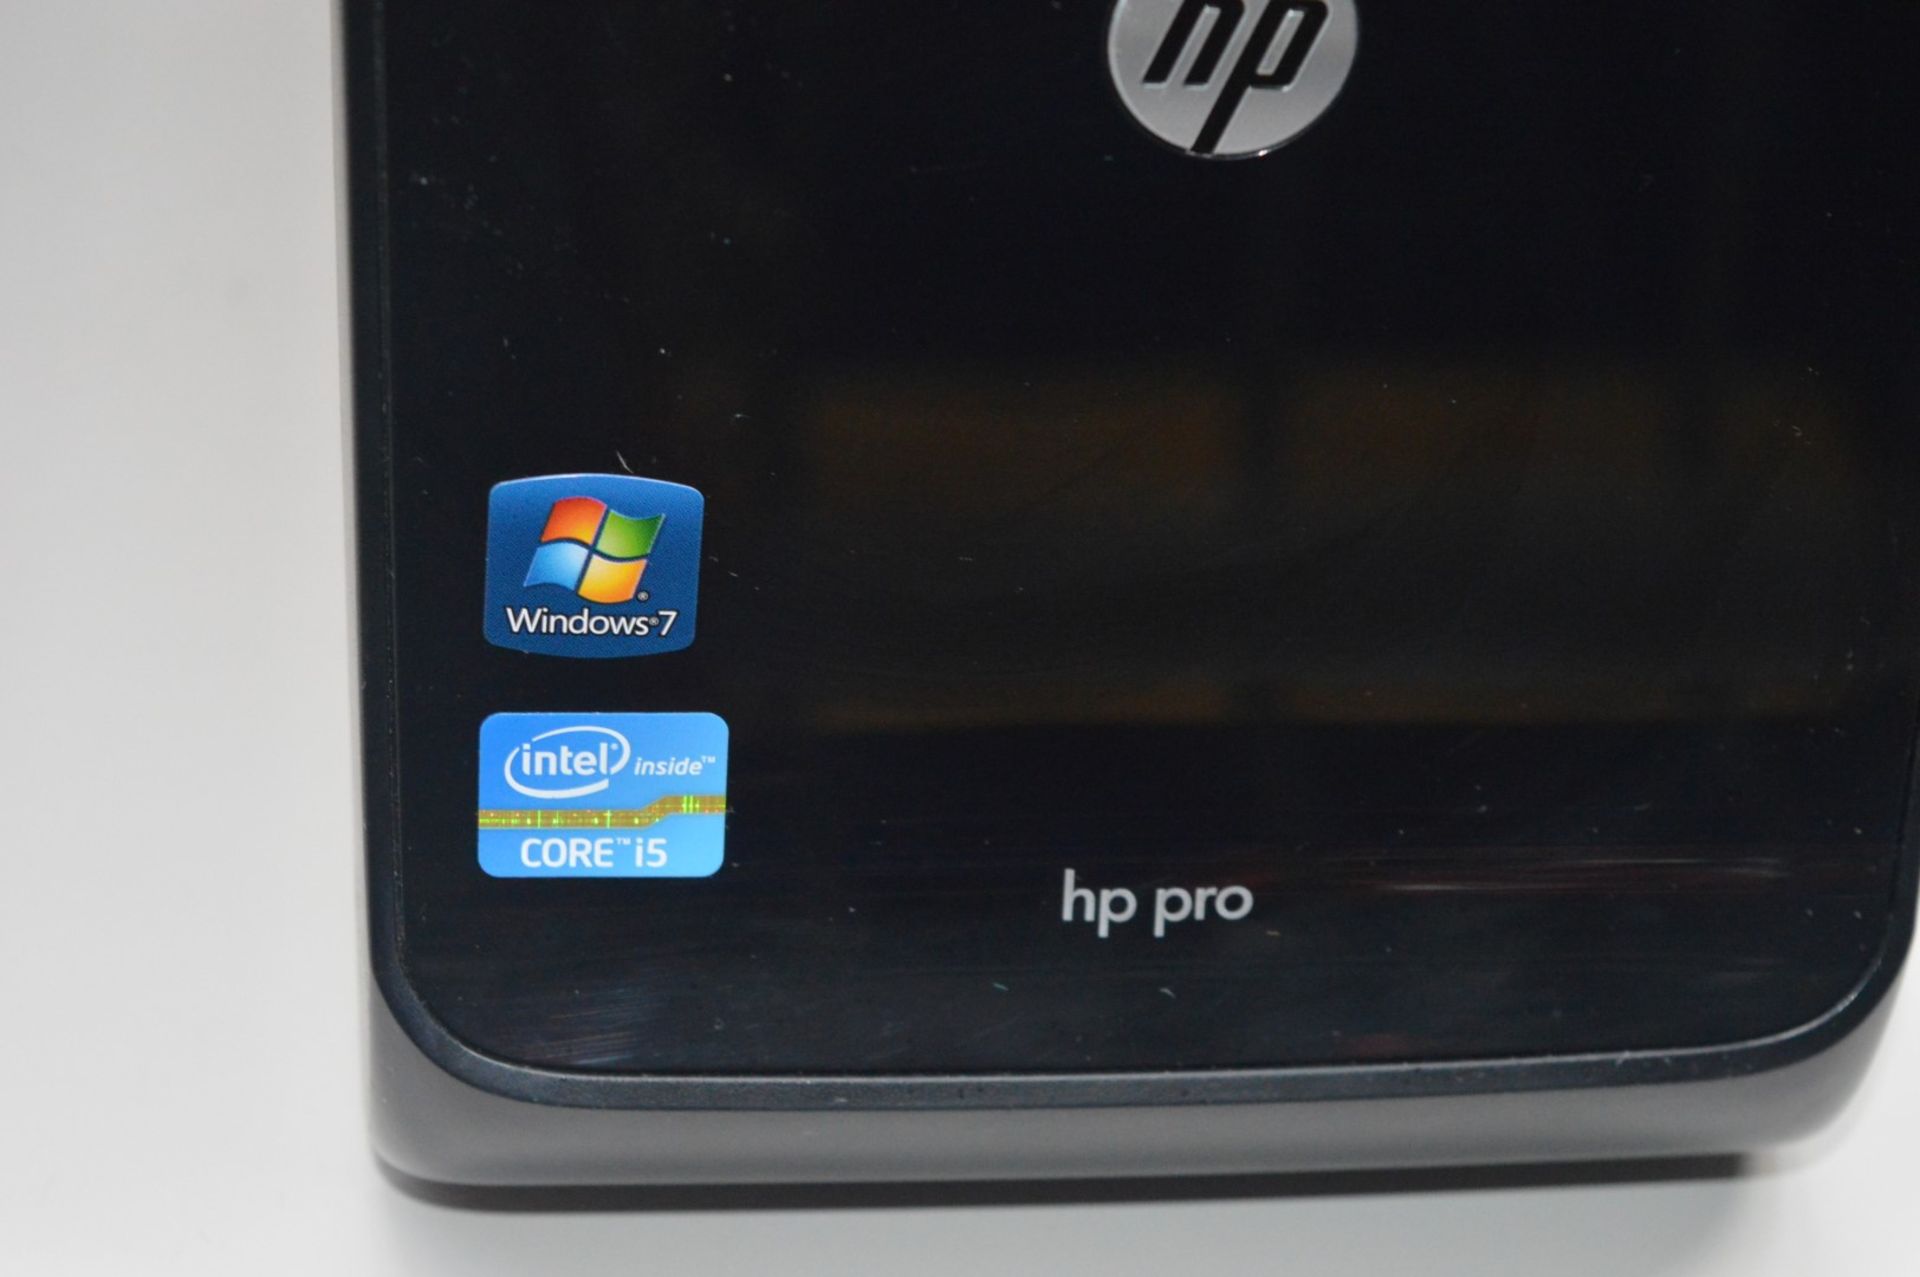 1 x HP Pro Desktop Computer System With Widescreen Monitor - Intel Core i5-2400 3.1ghz Quad Core - Image 3 of 5